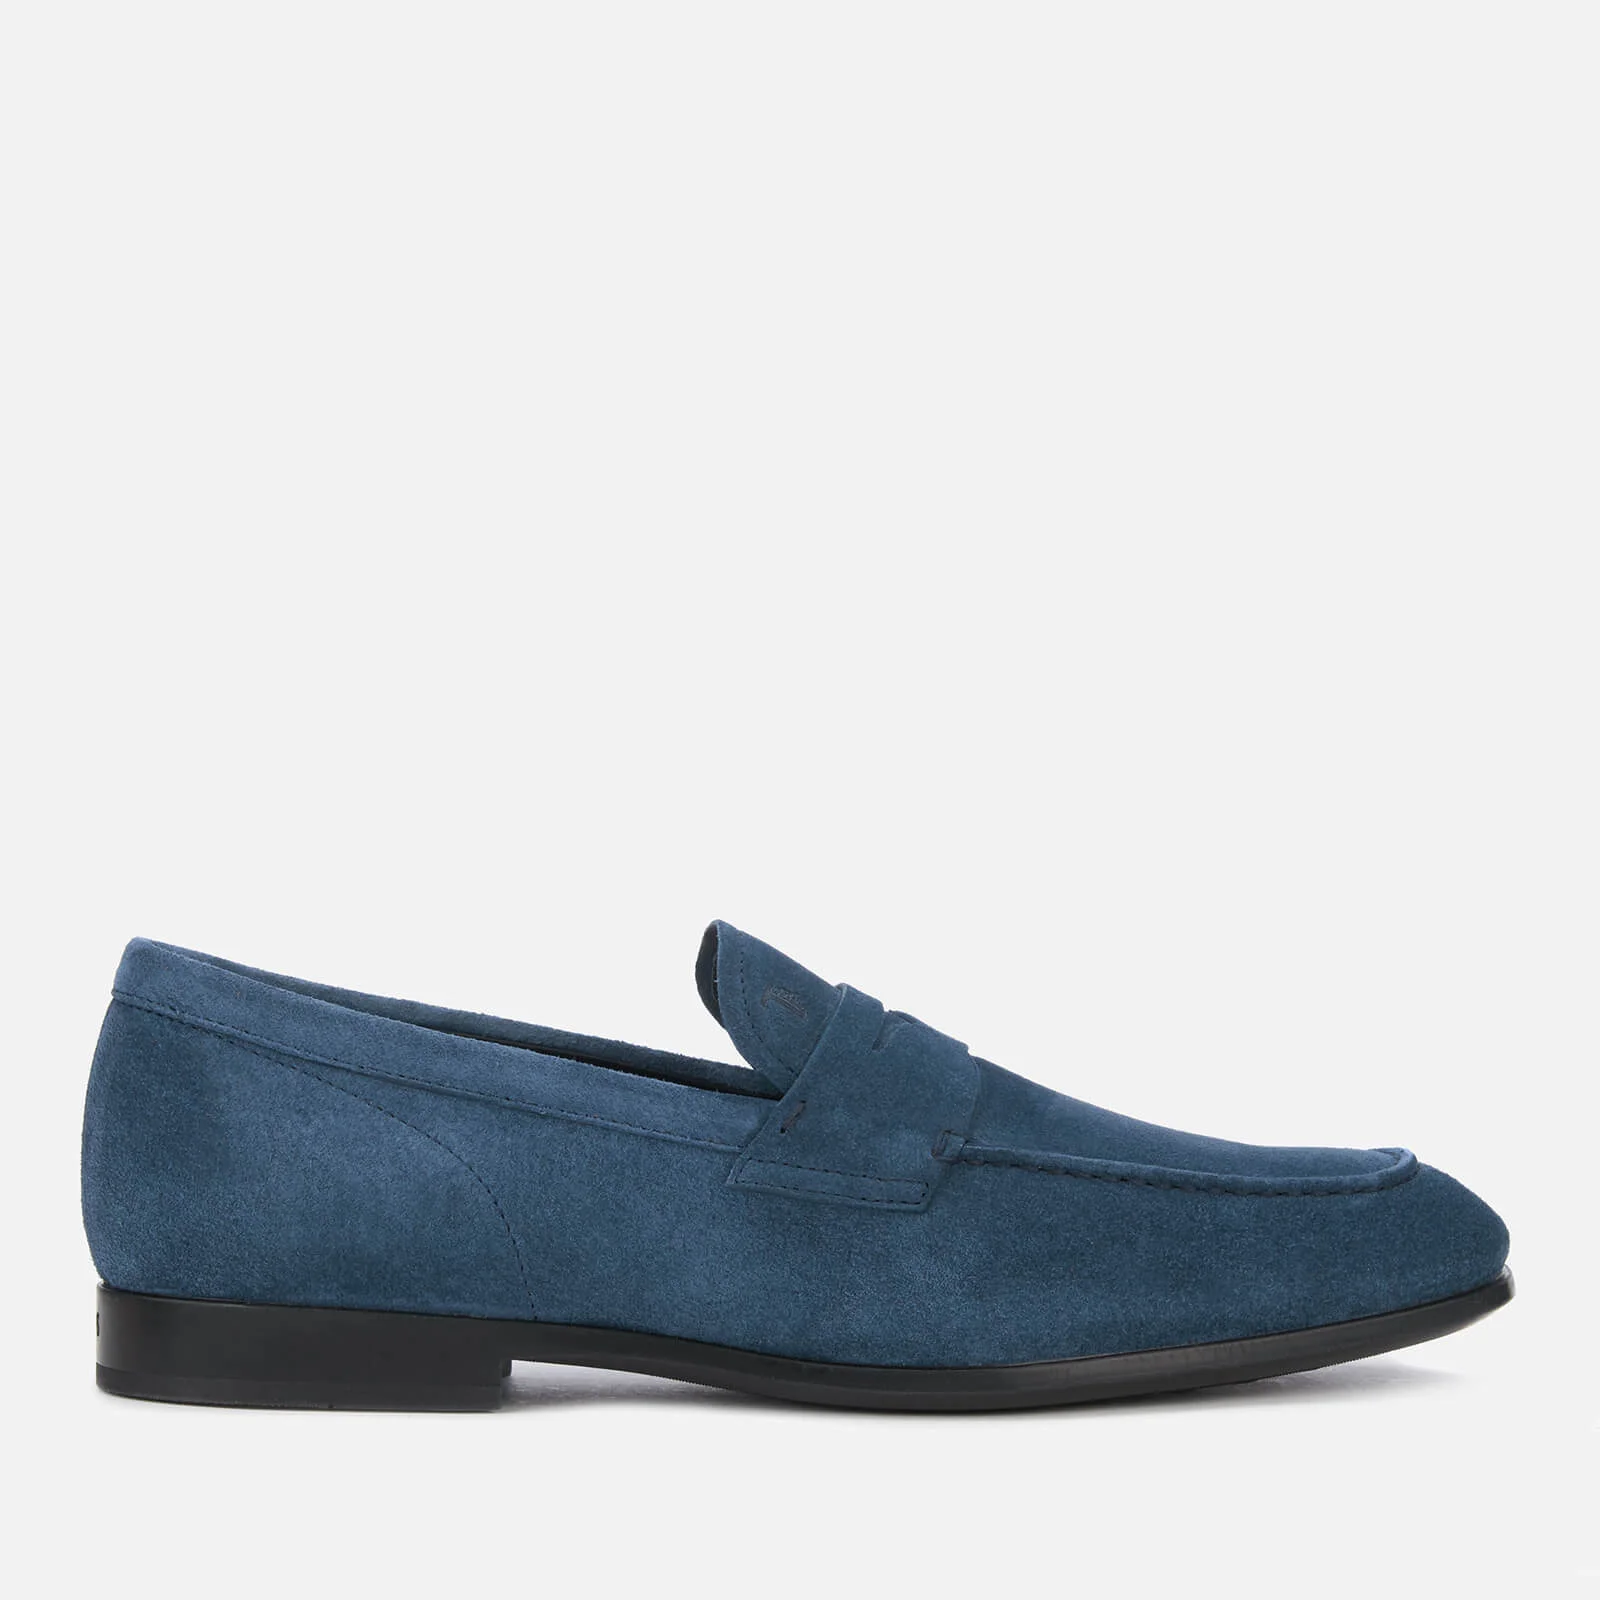 Tod's Men's Gomma Moccasin Shoes - Tirreno Scuro Image 1